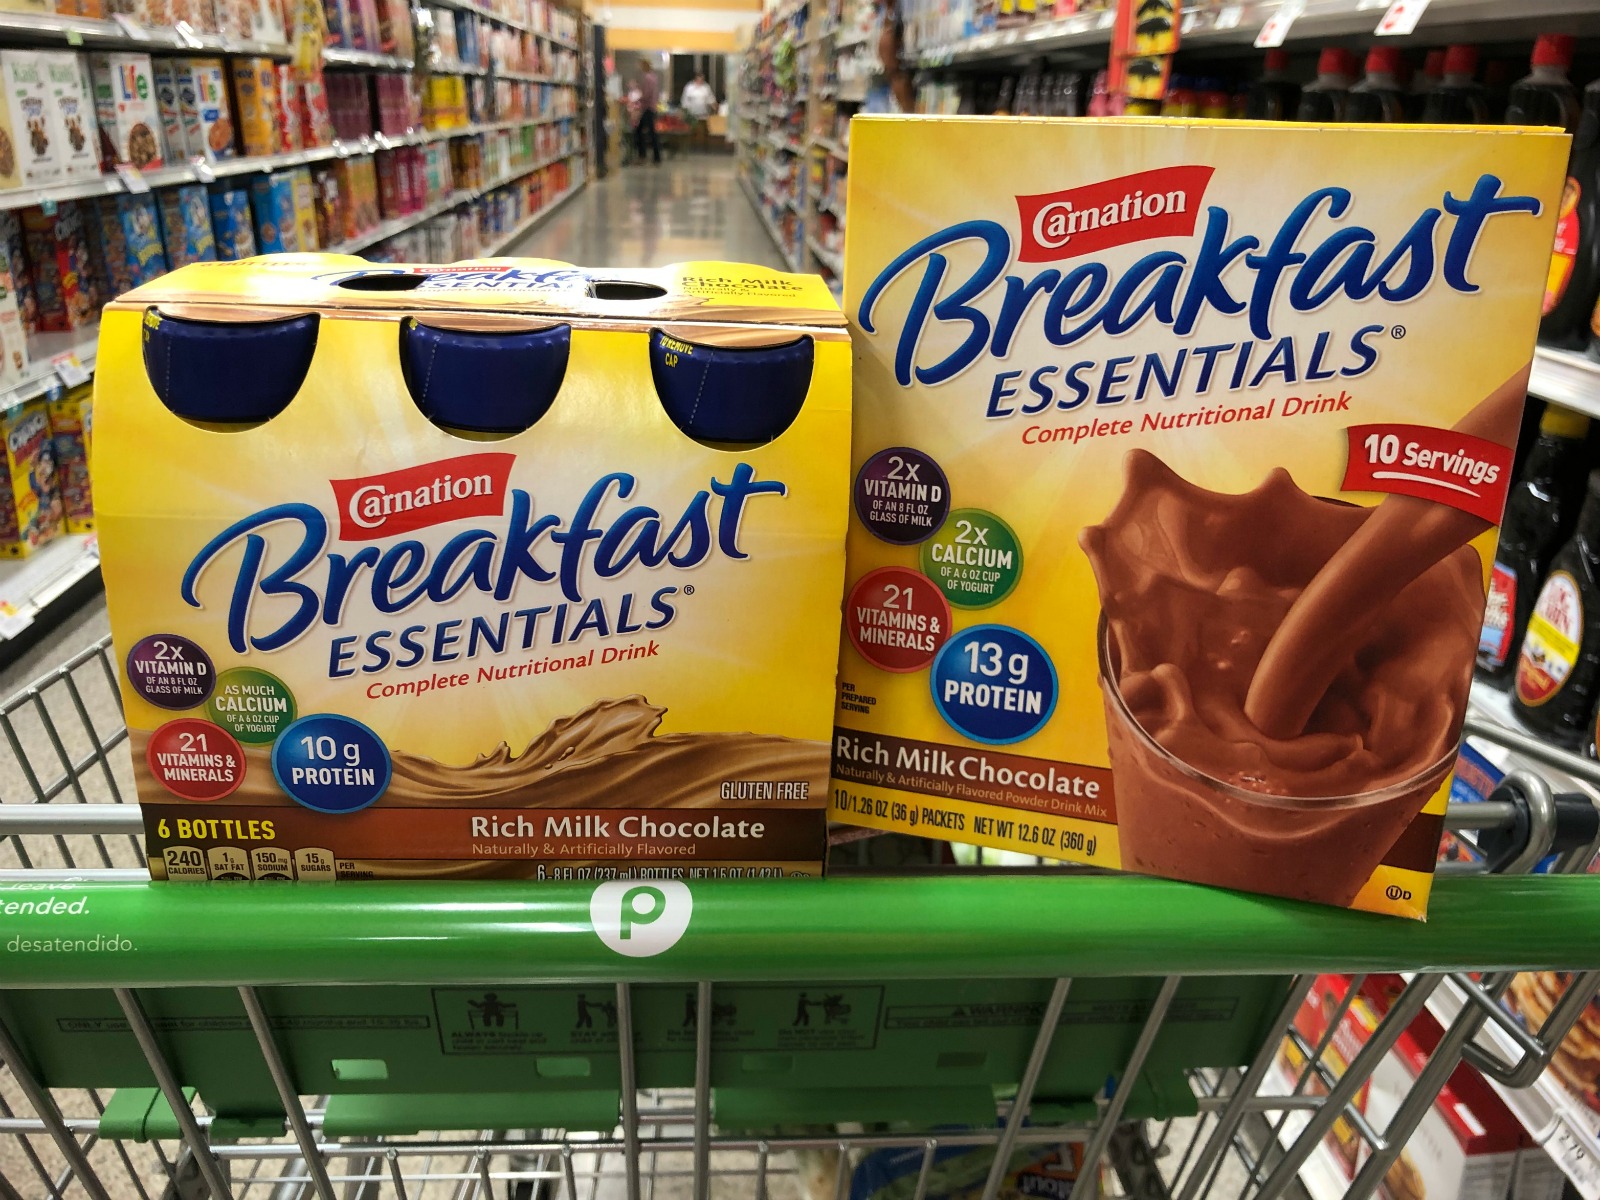 Stock Up On Your Favorite Carnation Breakfast Essentials® At A Super Discount Through 11/8 At Publix